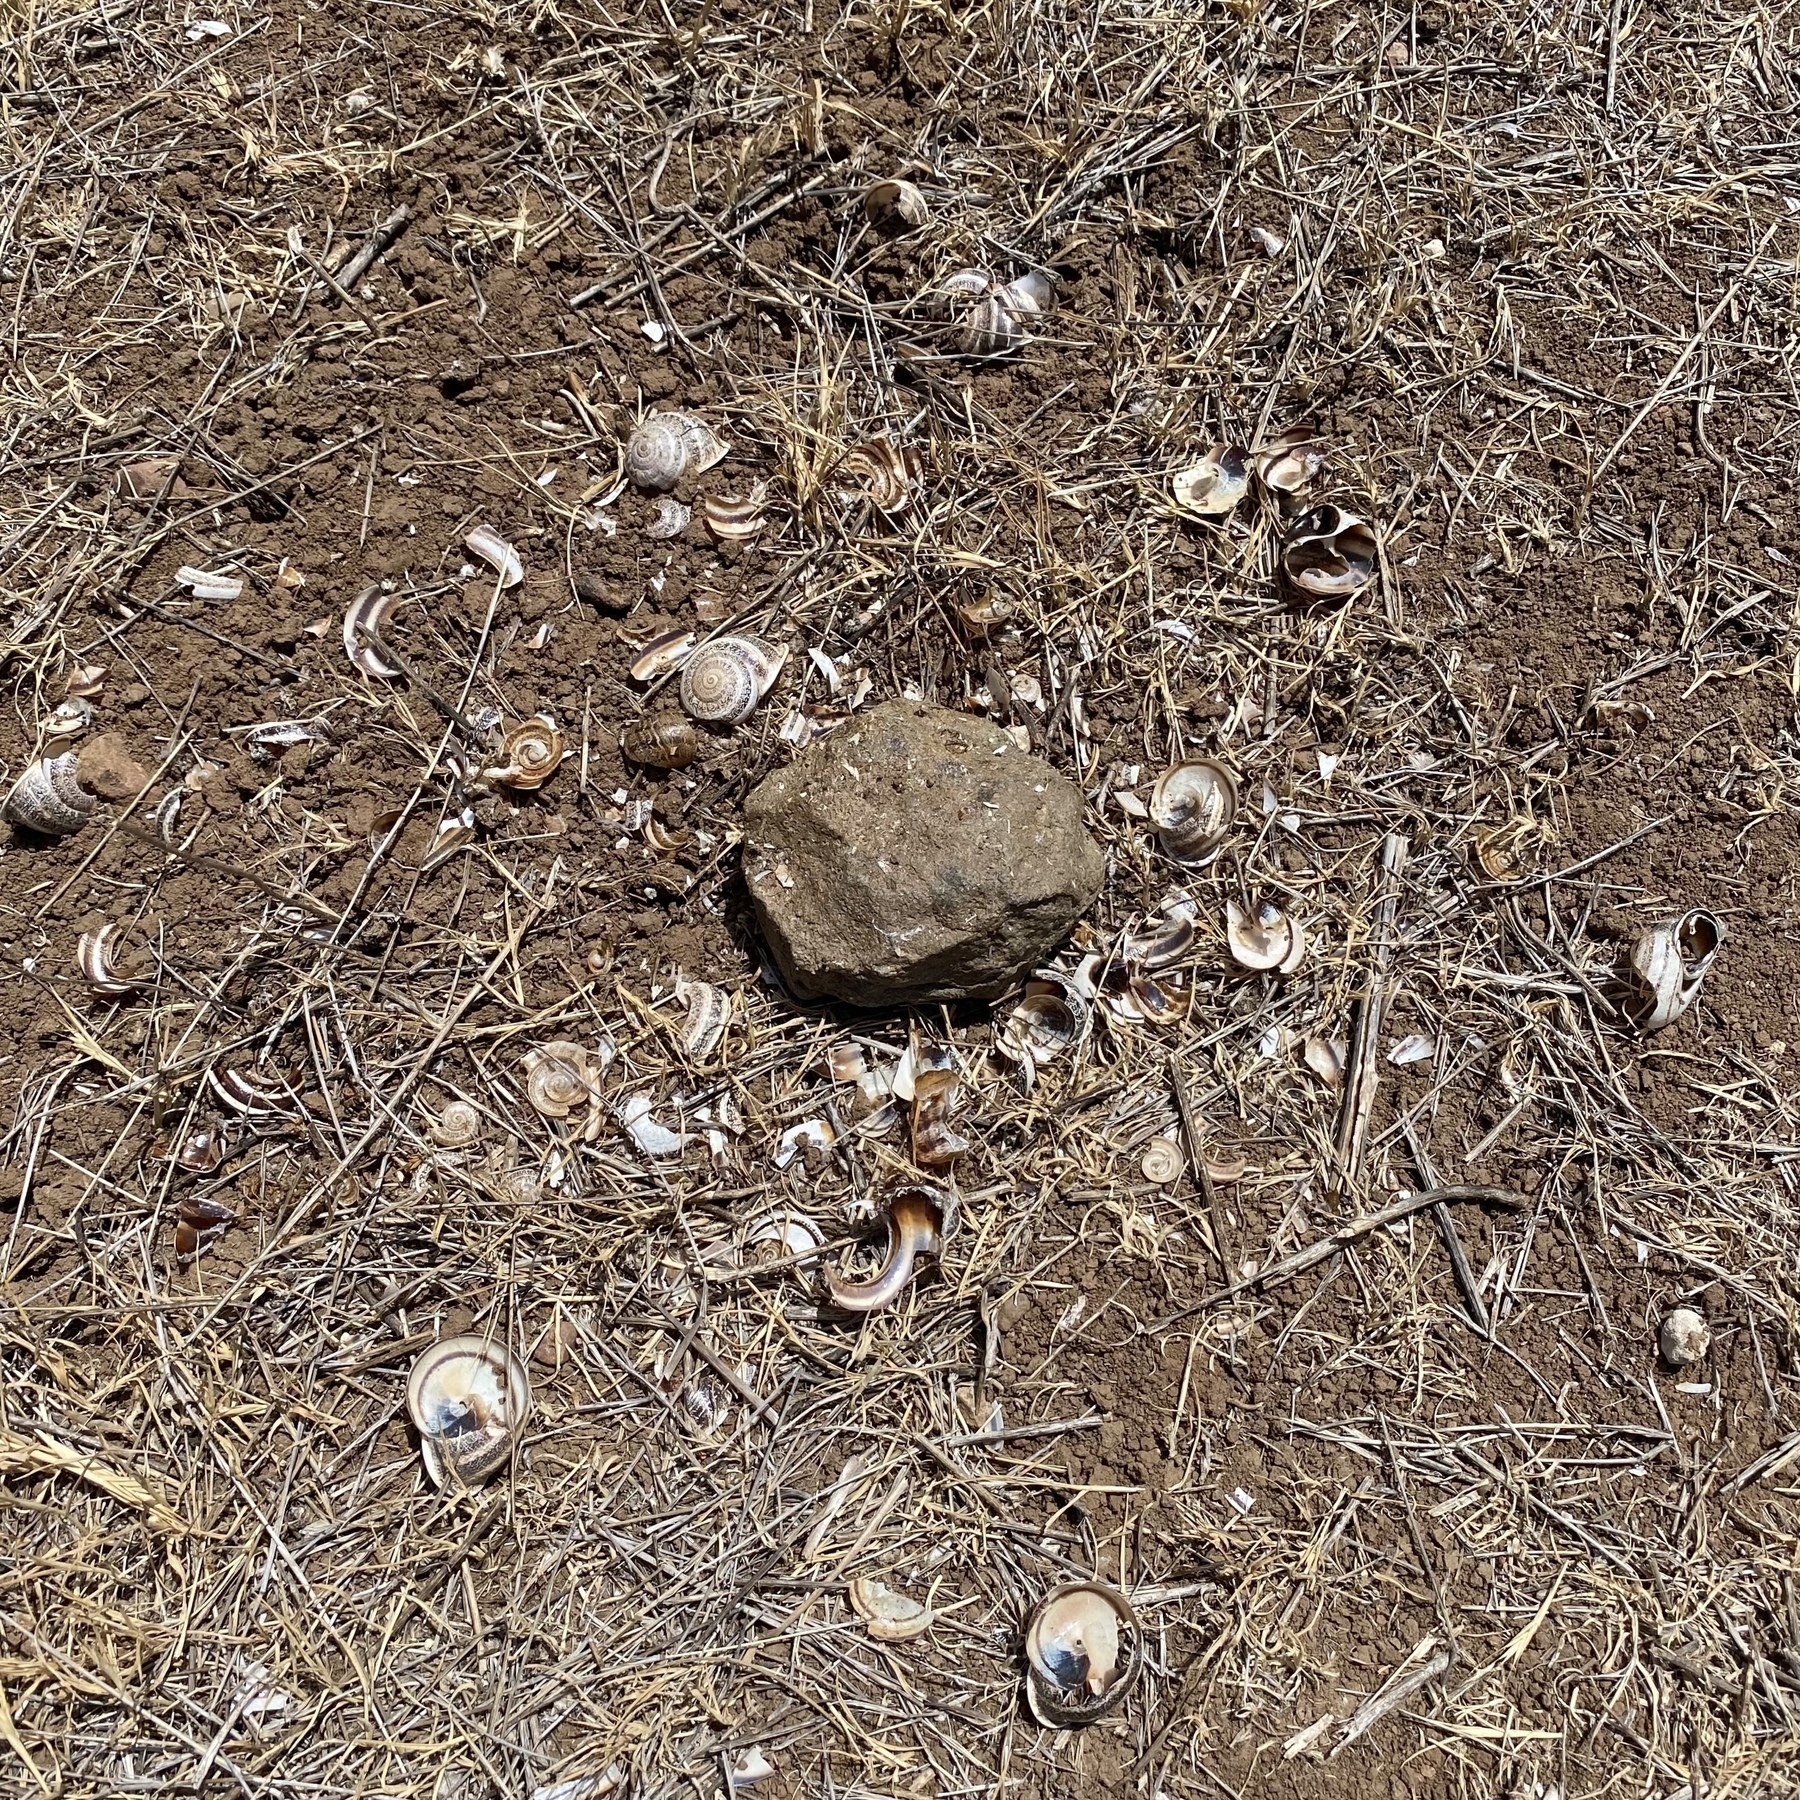 Close up of a small rock lying on some dirt and surrounded by broken bits of snail shells.